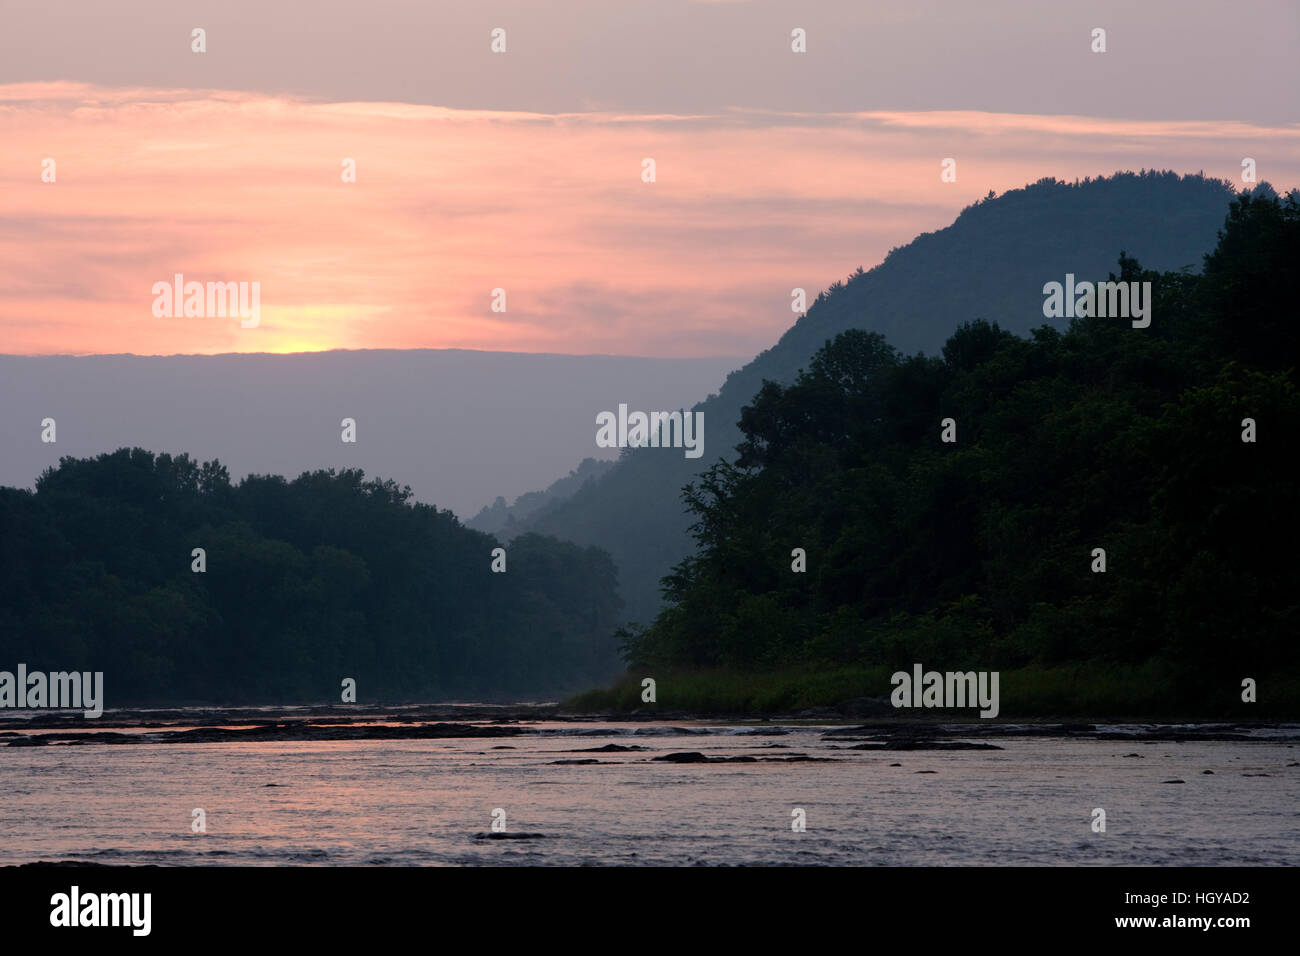 The White River at sunset in Hartford, Vermont.  Connecticut River tributary. Stock Photo